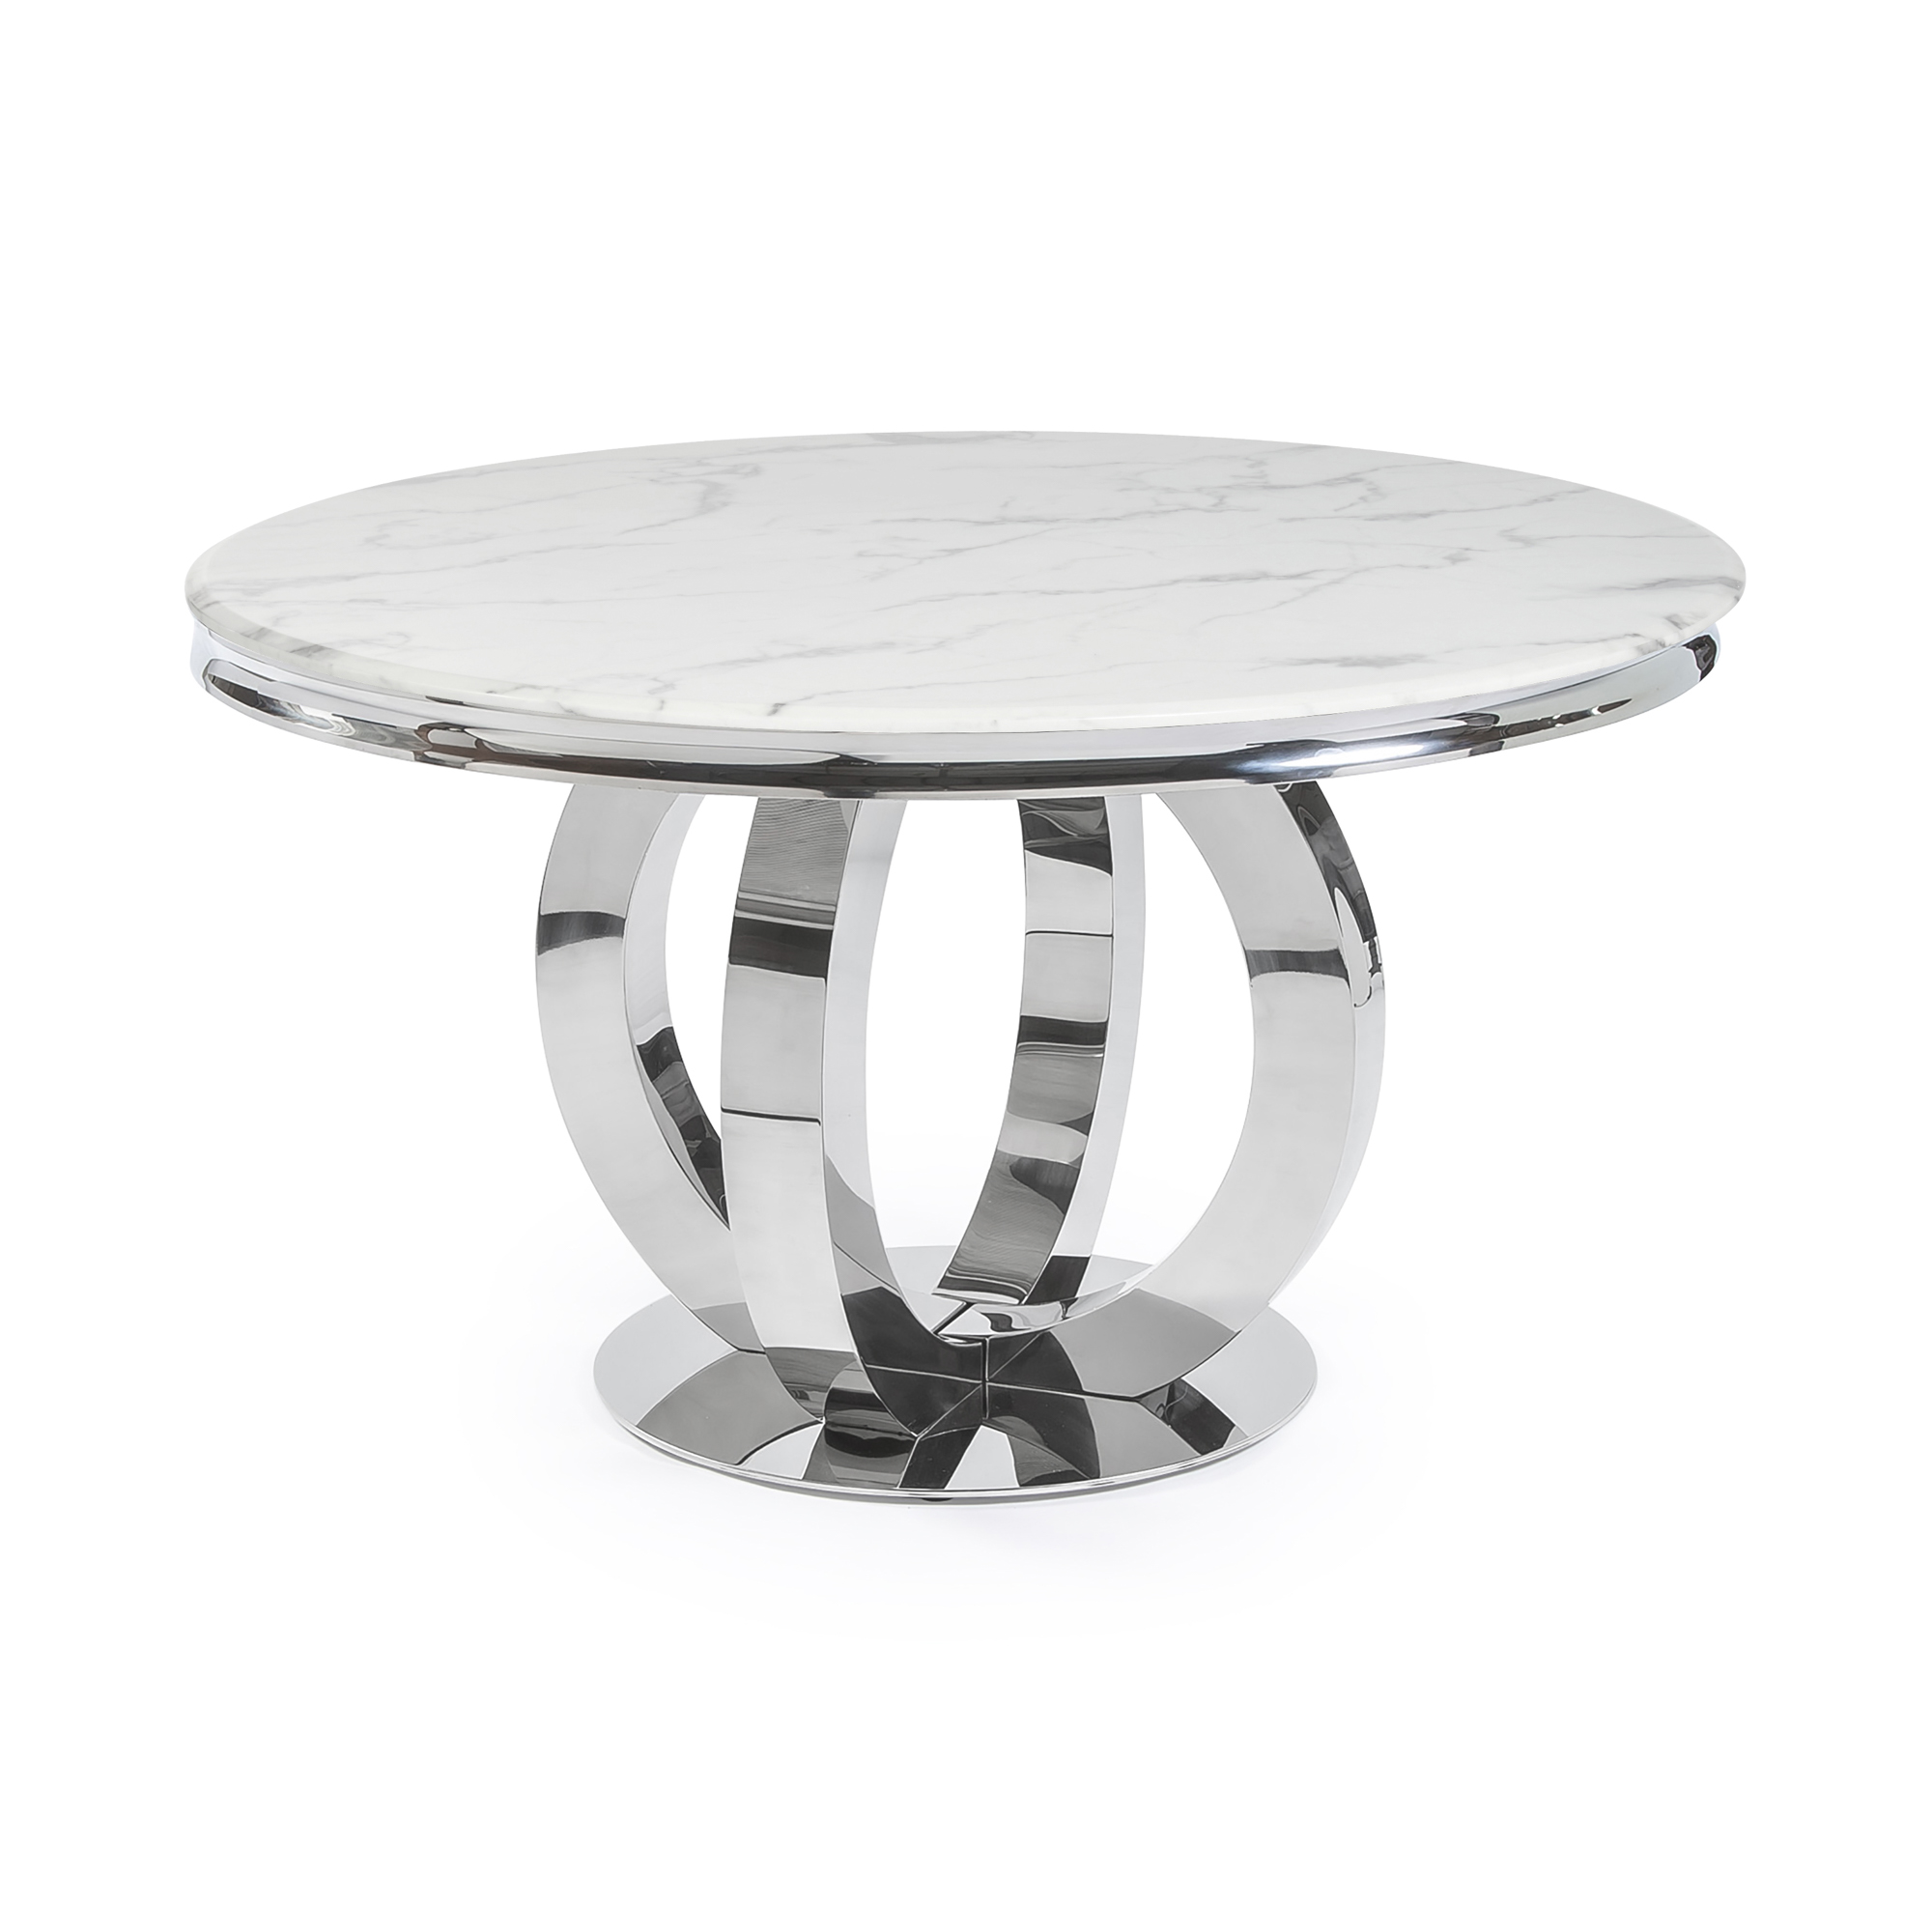 1.3M Polished Circular Stainless Steel Dining Table with White Marble Top